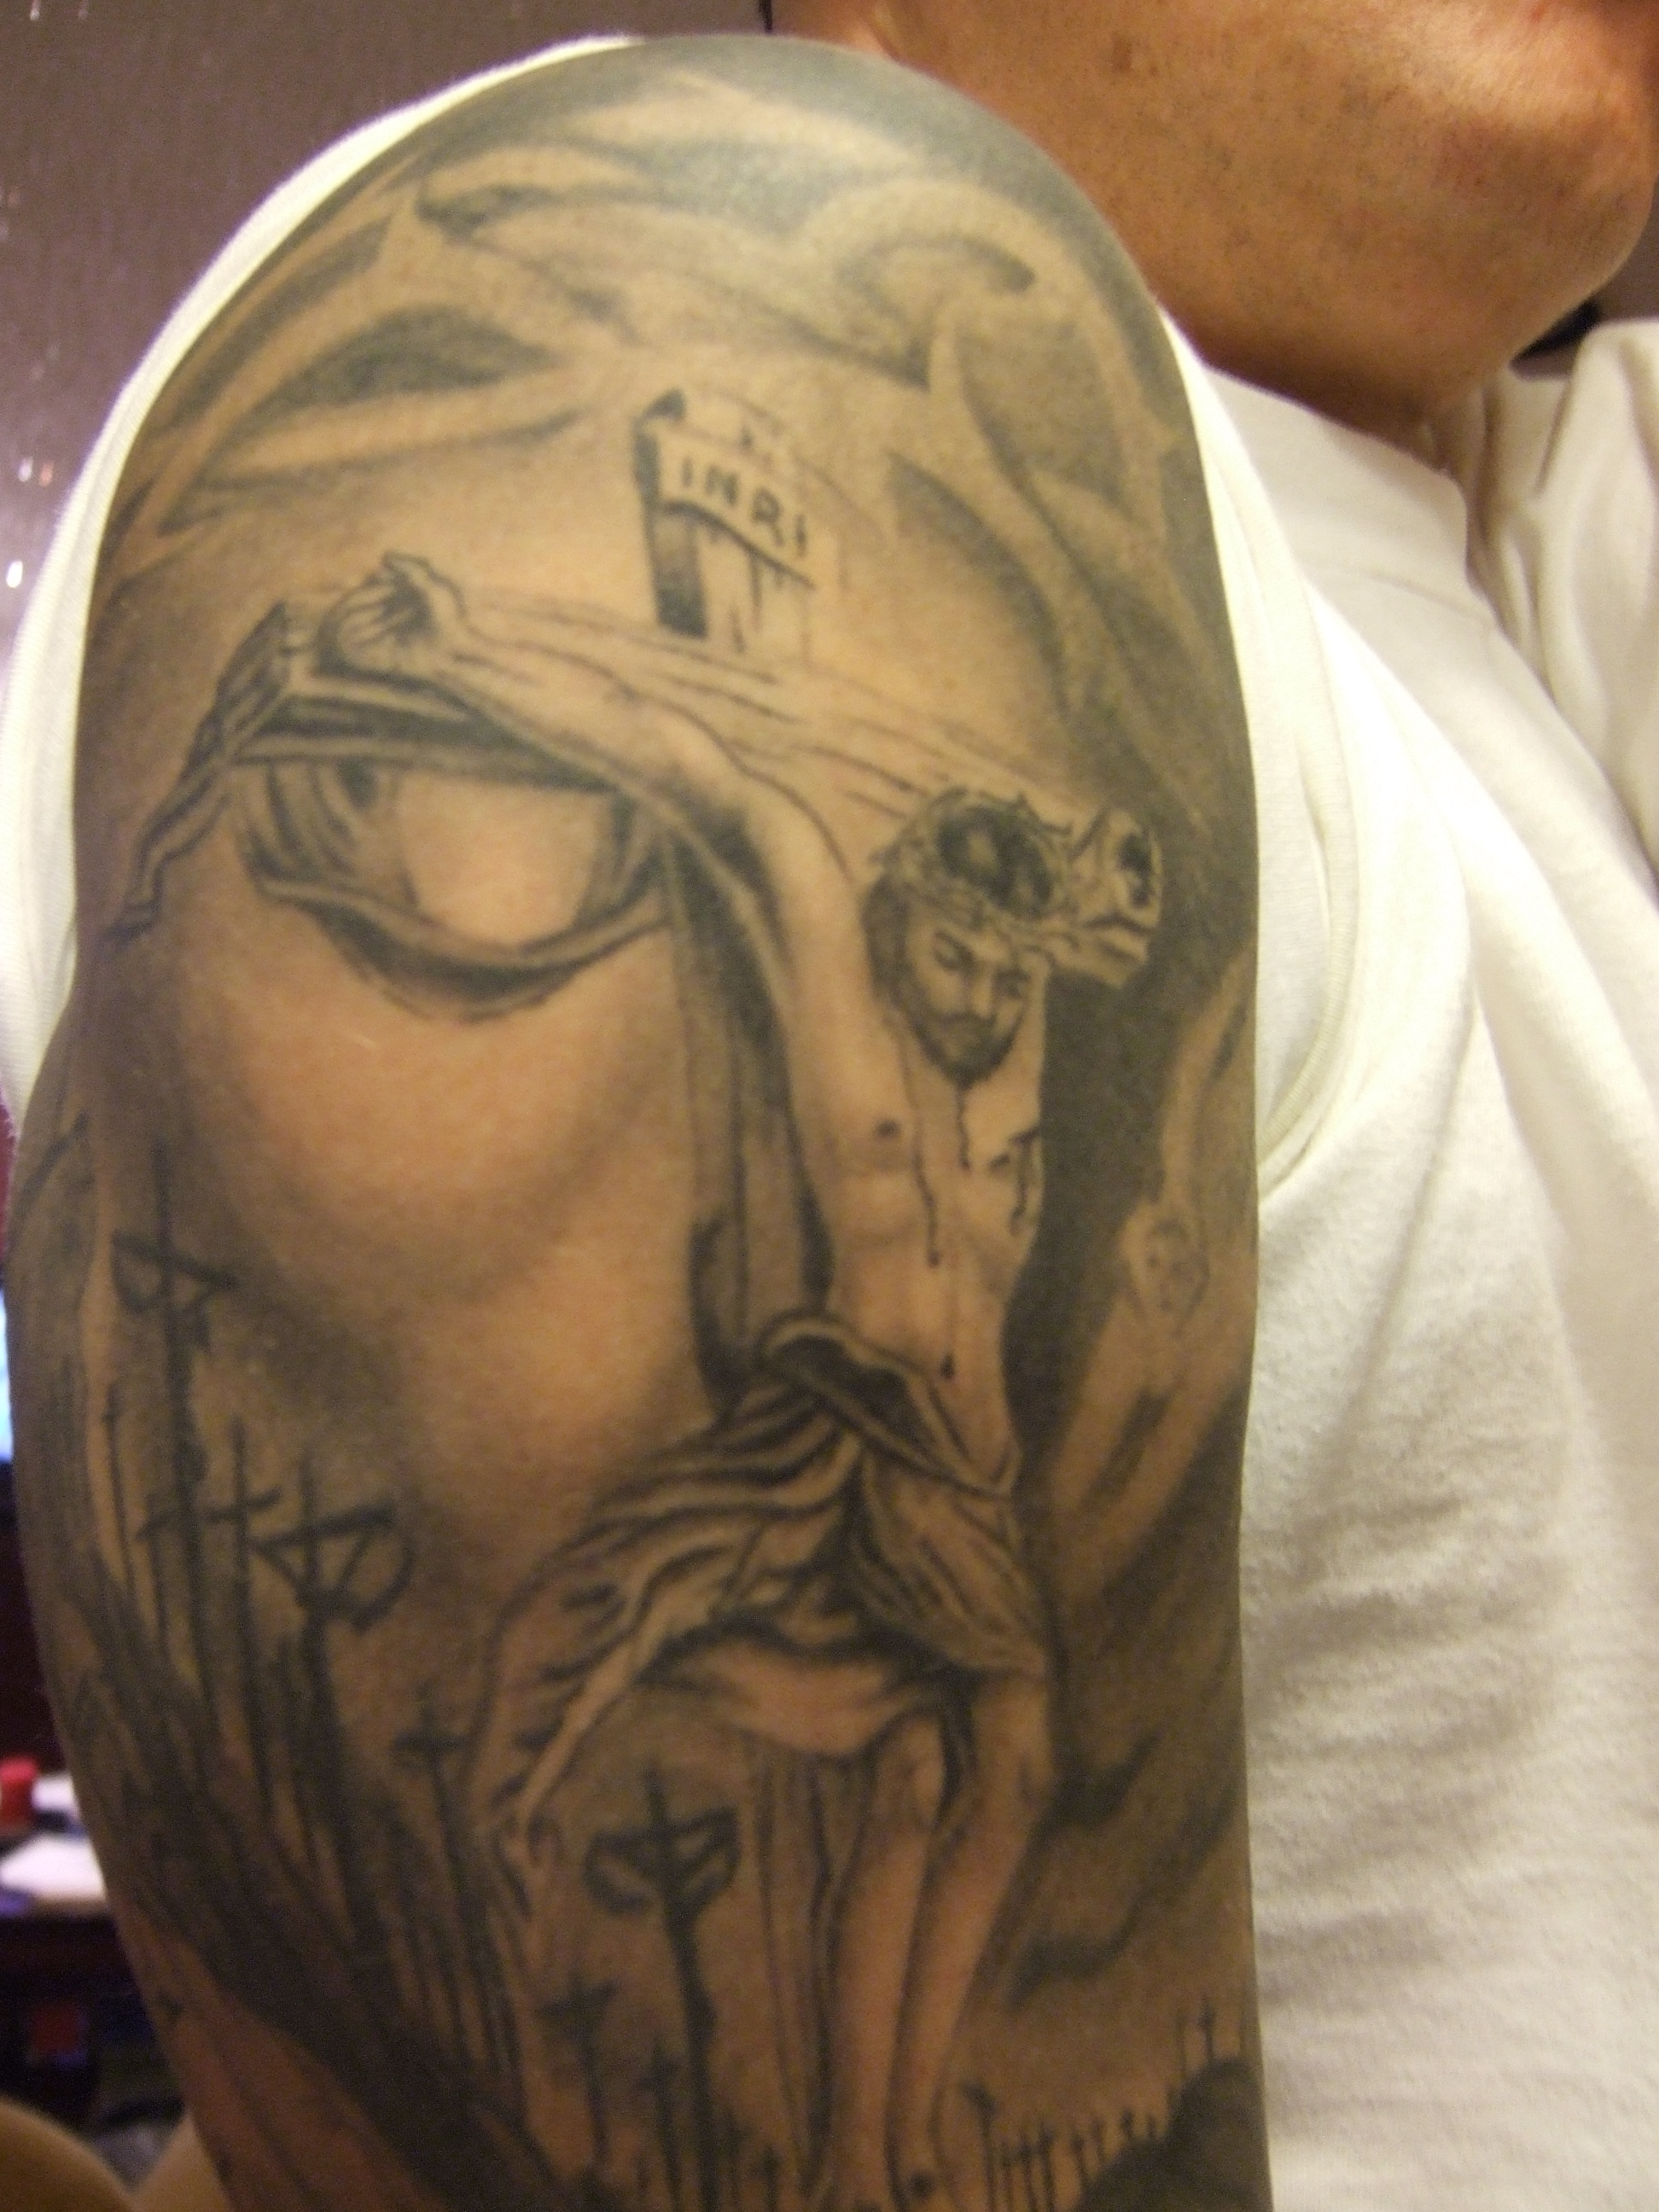 Jesus Tattoos Designs, Ideas and Meaning | Tattoos For You